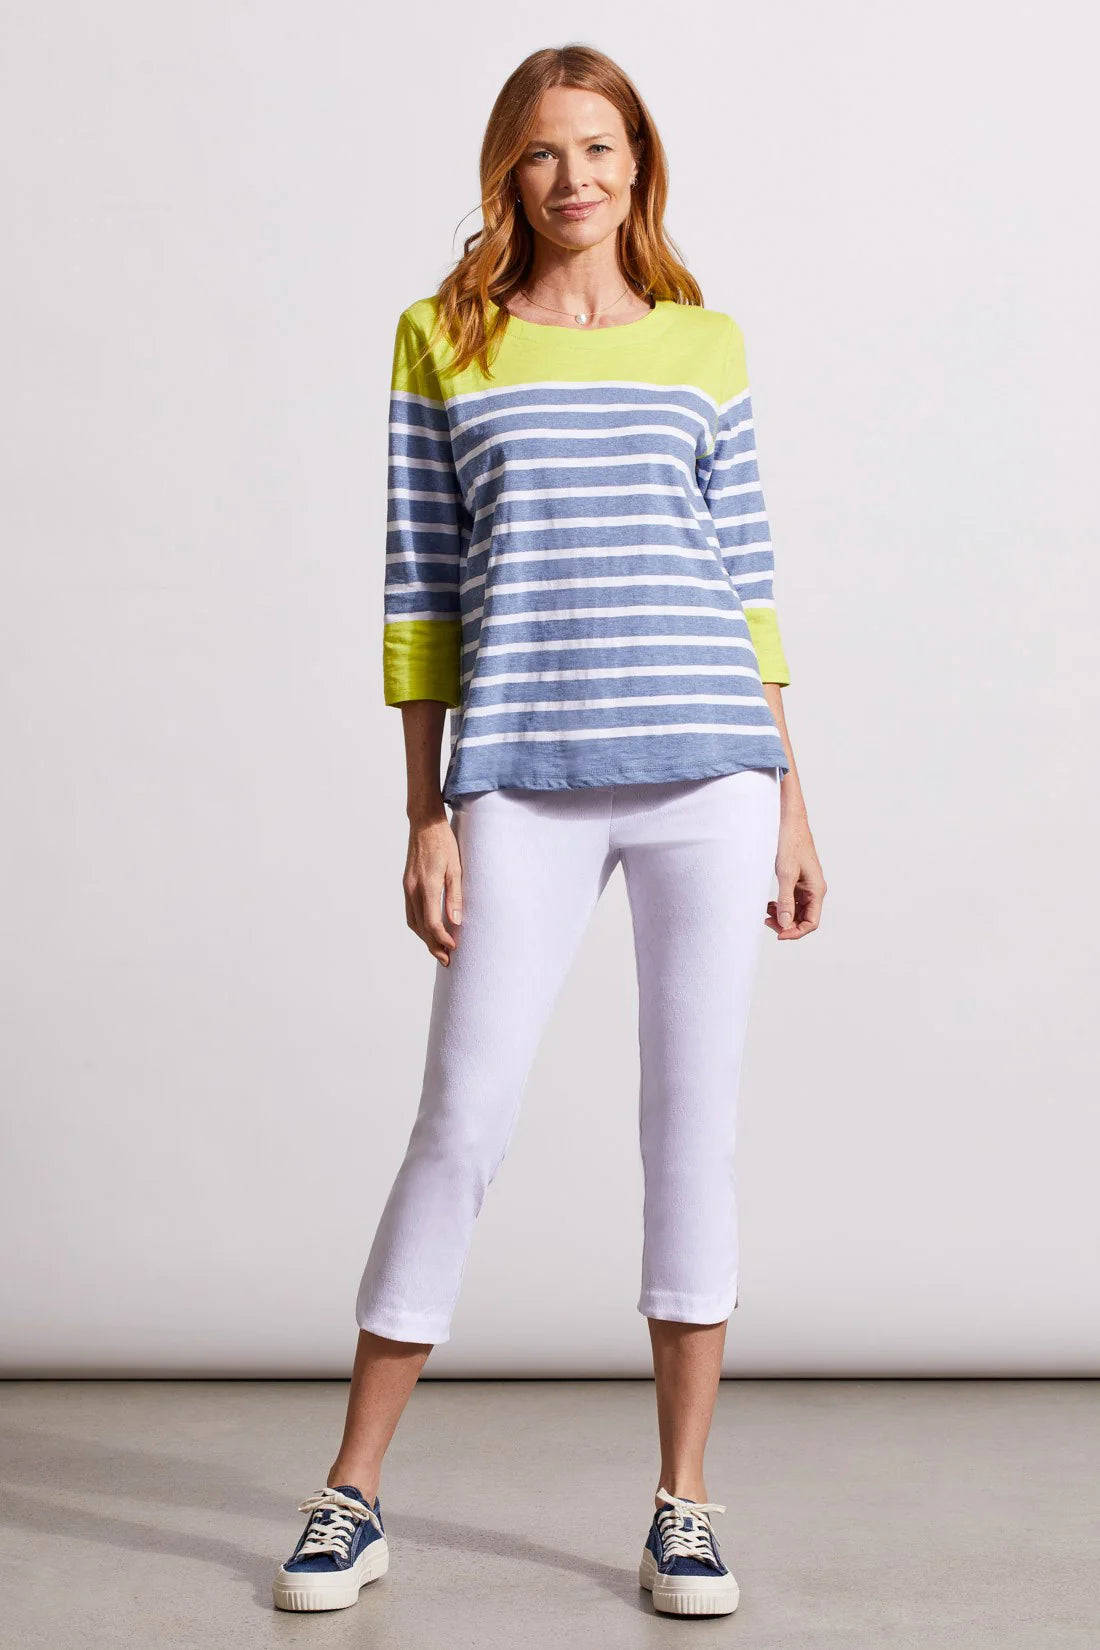 Cotton Color Block Boatneck Top by Tribal